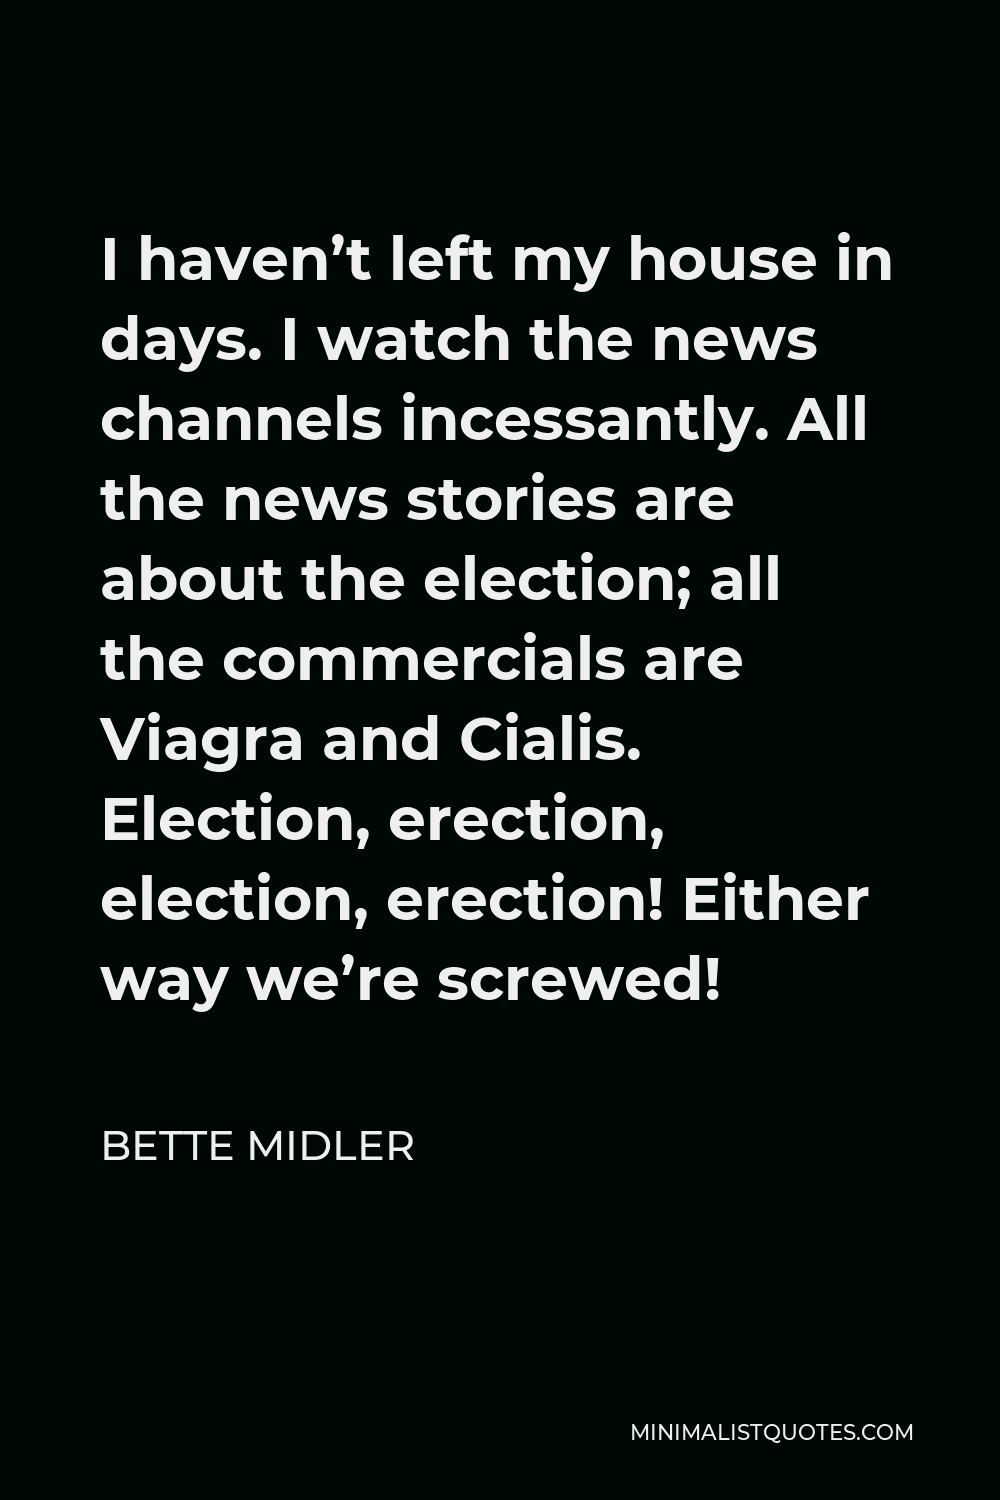 Bette Midler Quote - I haven’t left my house in days. I watch the news channels incessantly. All the news stories are about the election; all the commercials are Viagra and Cialis. Election, erection, election, erection! Either way we’re screwed!